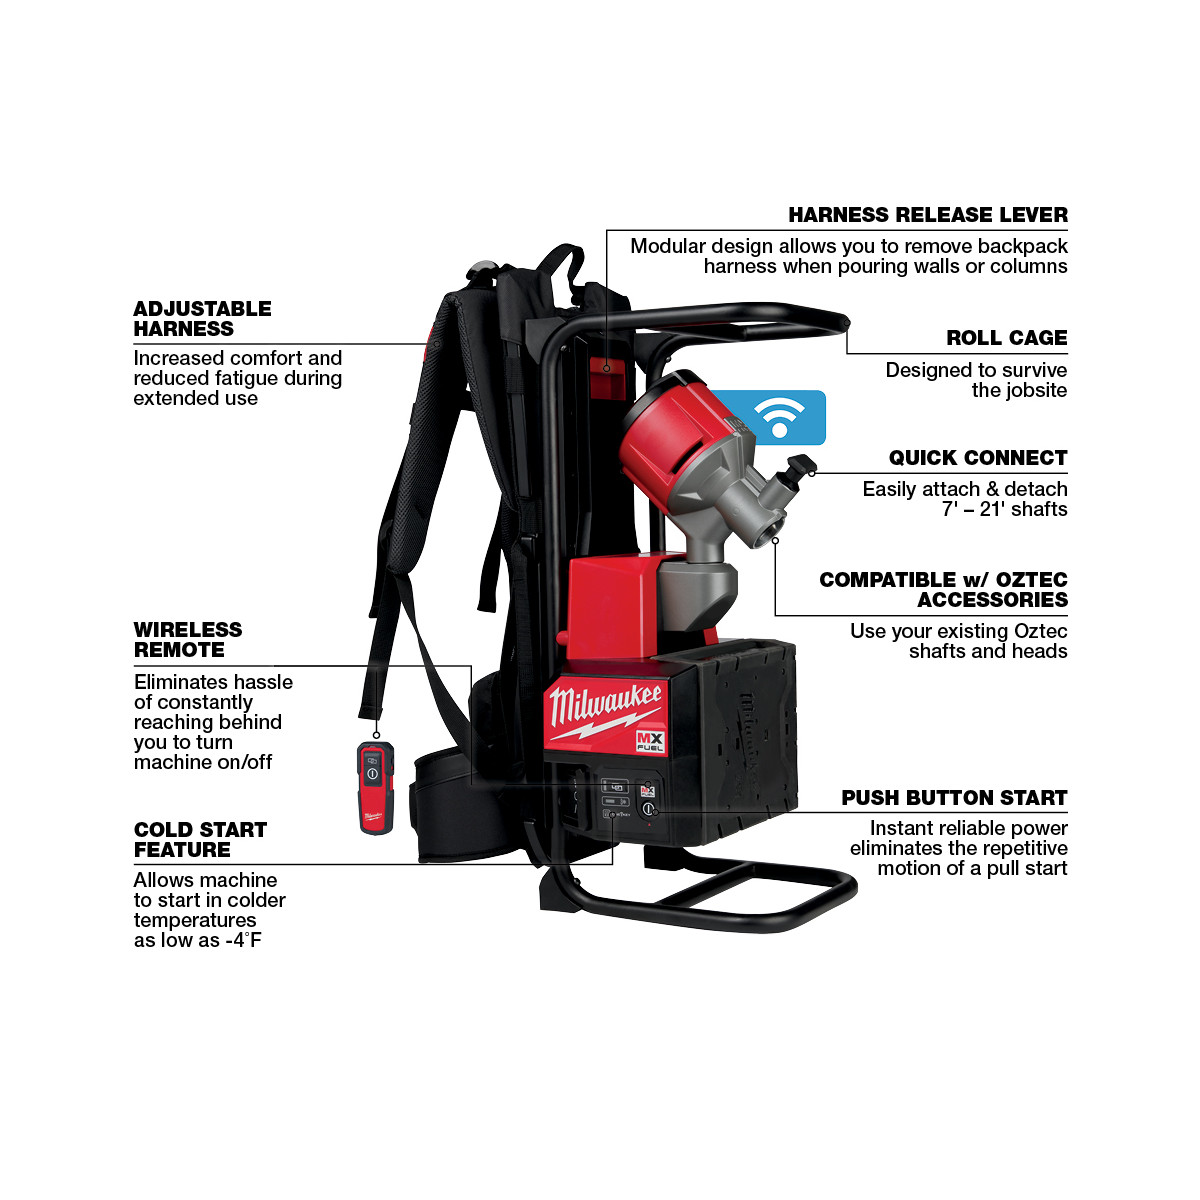 MX FUEL Backpack Concrete Vibrator Kit from Columbia Safety